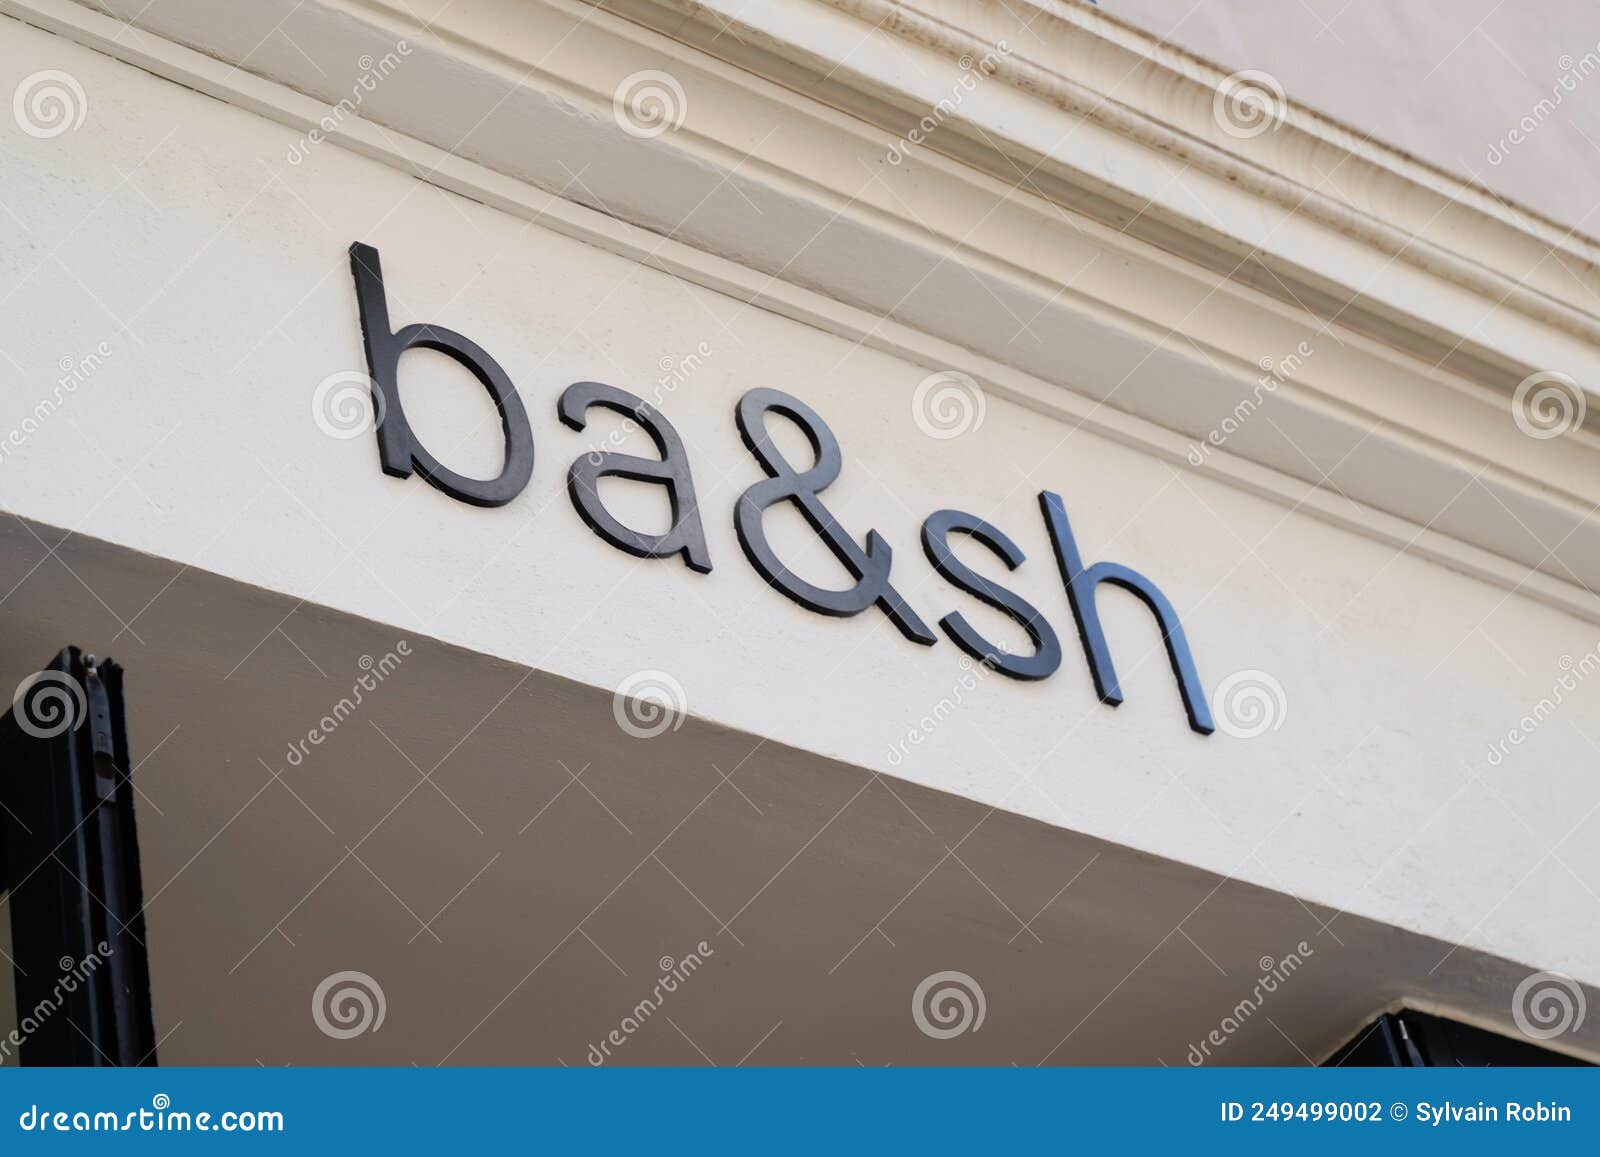 Ba & Sh Sign Text Store and Logo Brand Shop on Wall Entrance Facade  Boutique Editorial Photography - Image of front, logo: 249499002